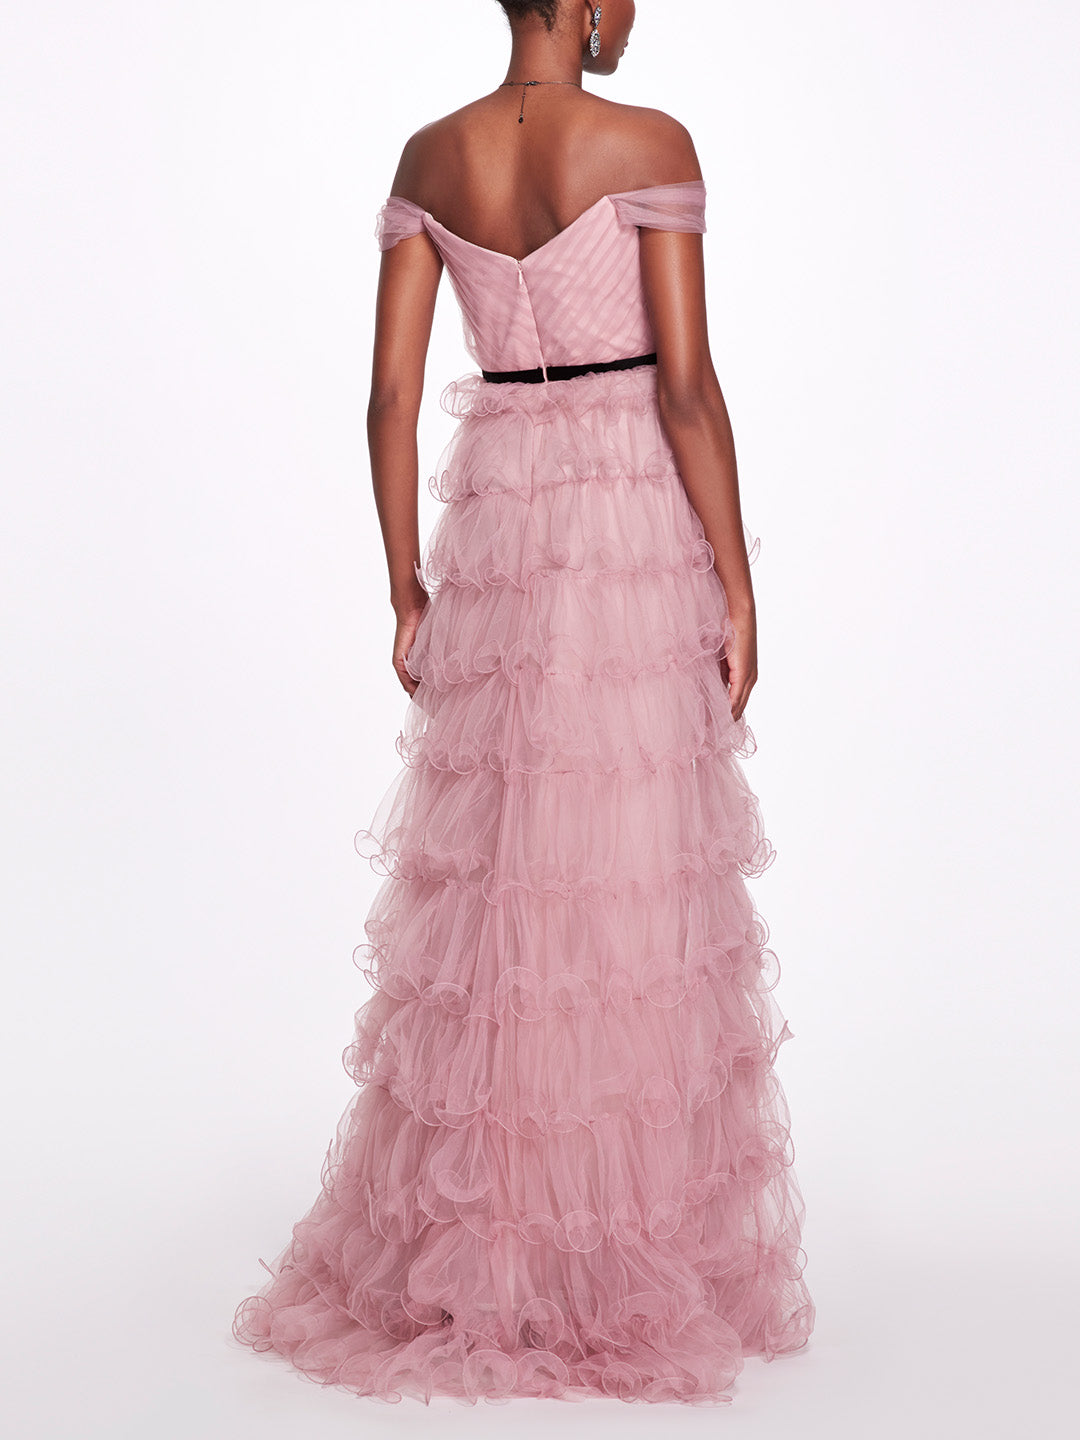 Multi-Tiered Tulle Gown | Marchesa